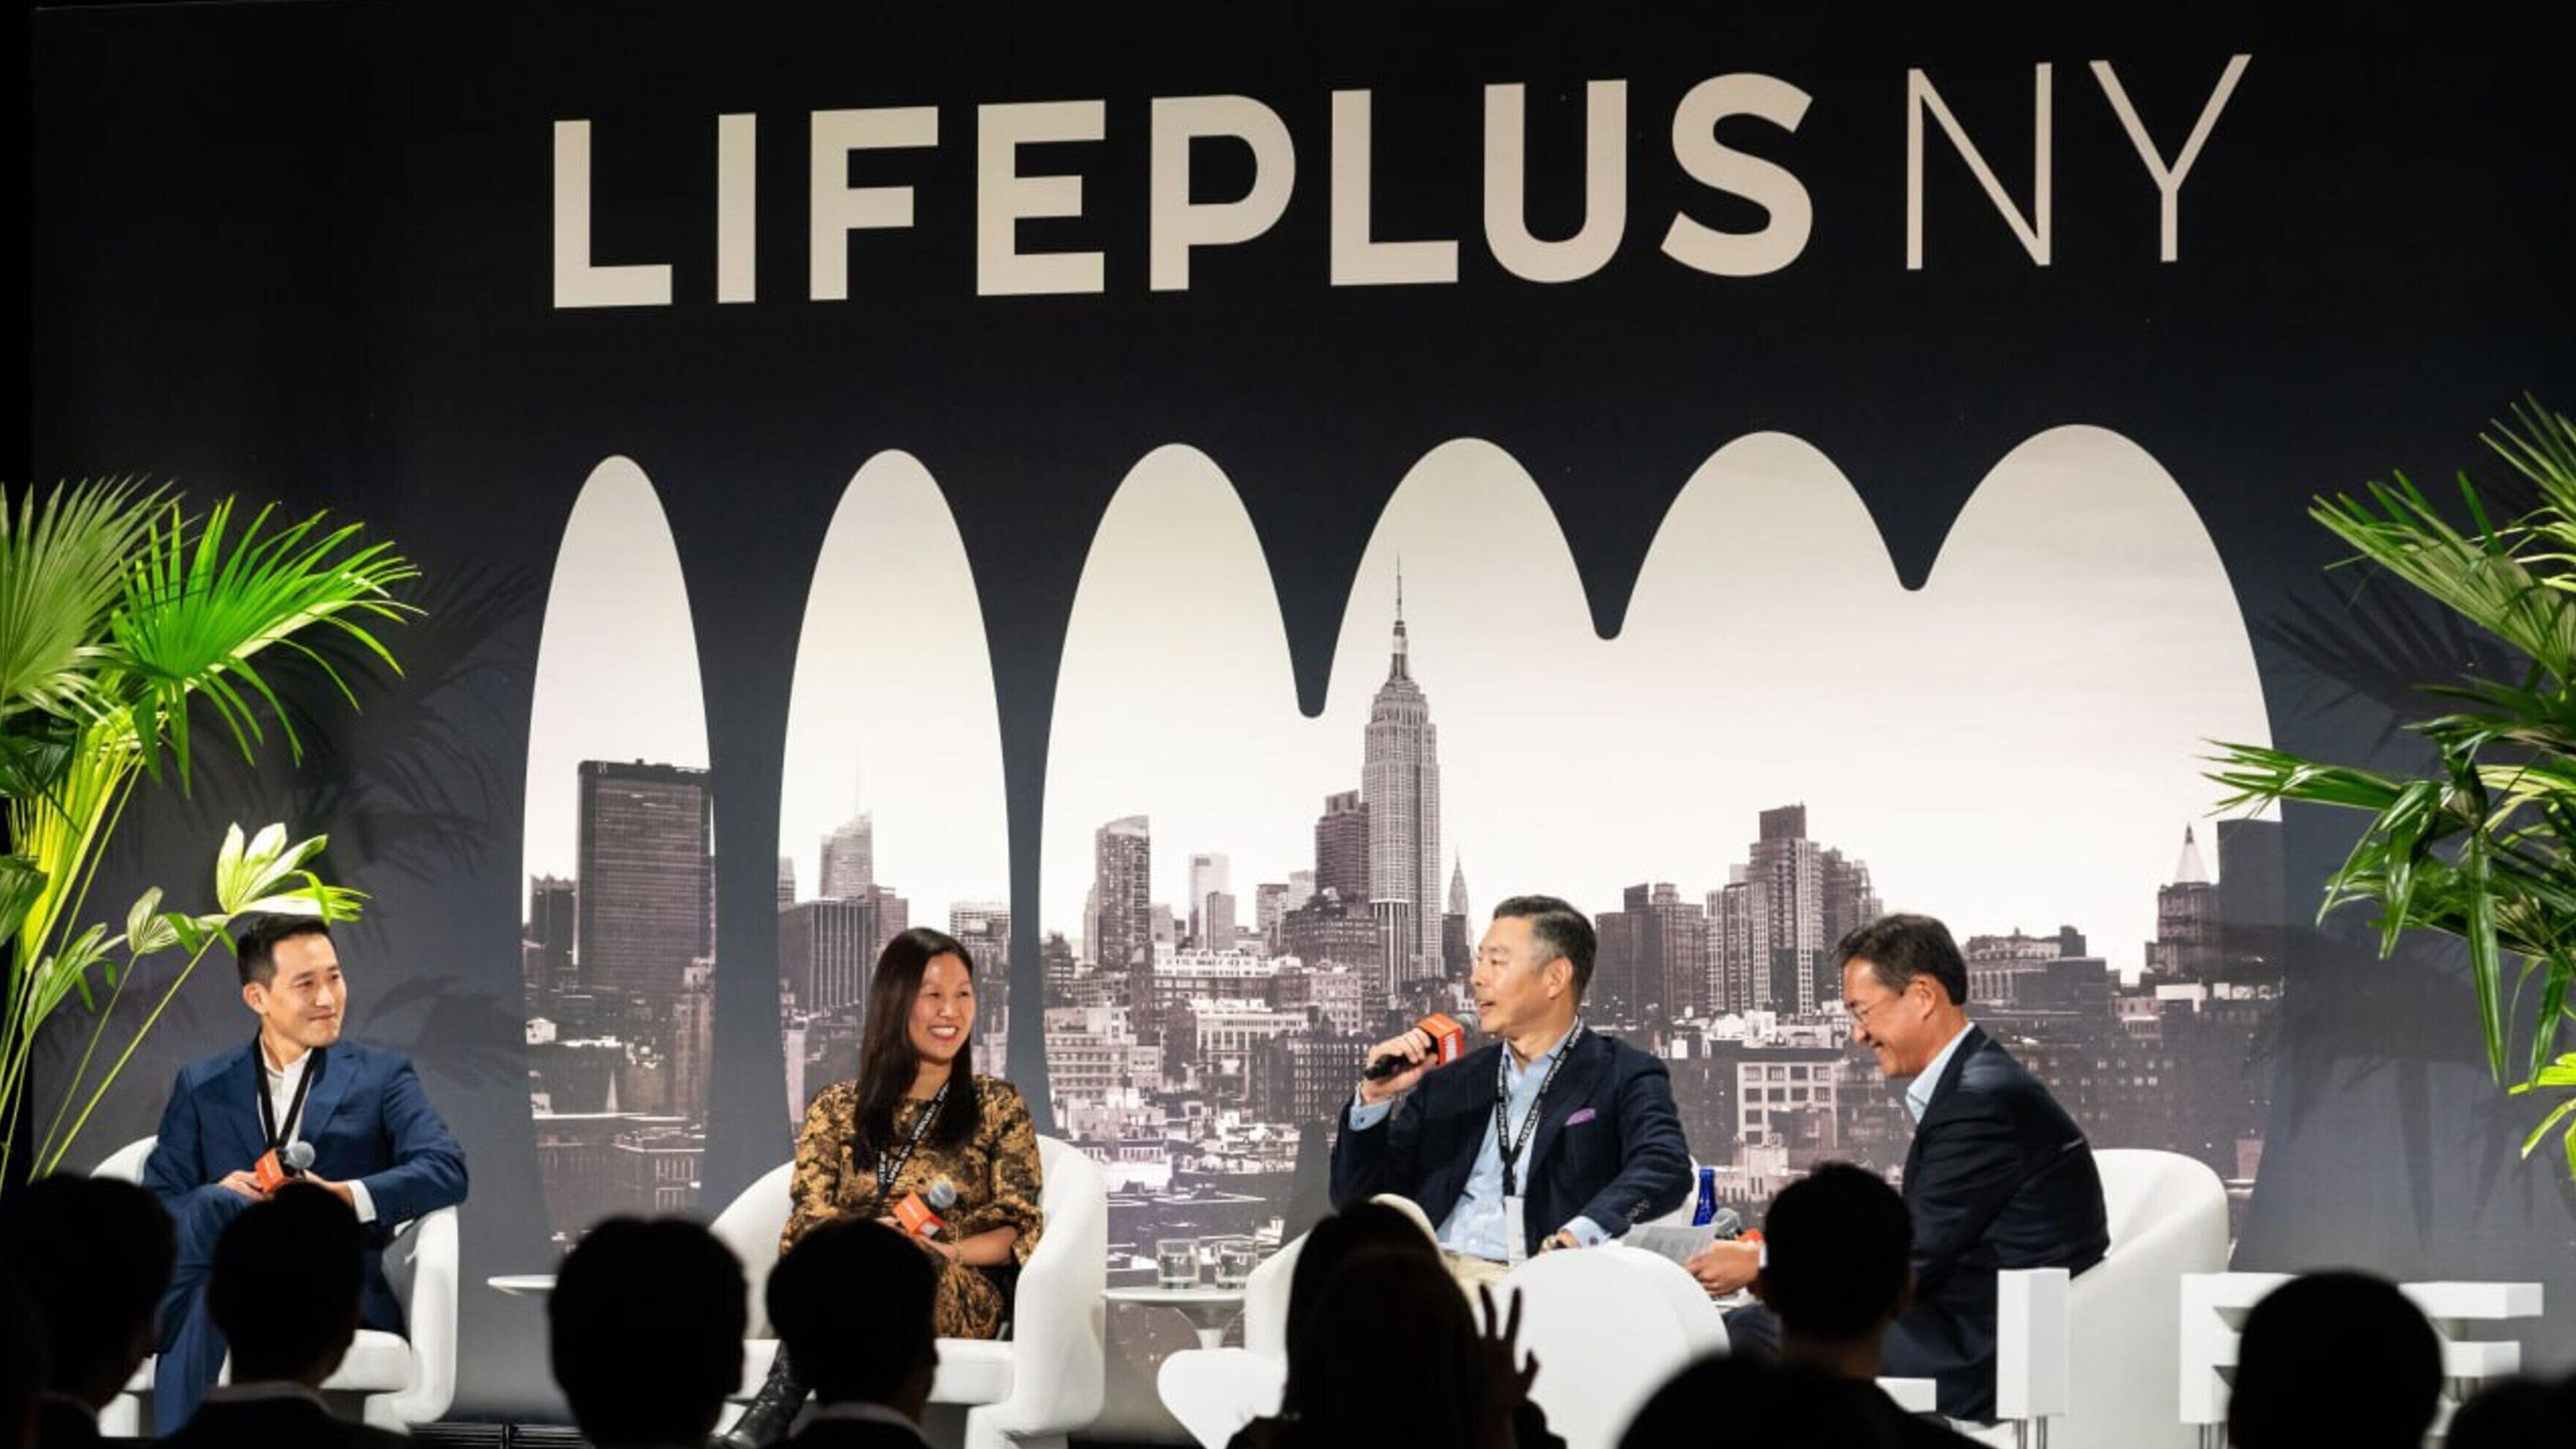 Events like Hanwha's Lifeplus NY help foster the next generation of talent in the finance industry.